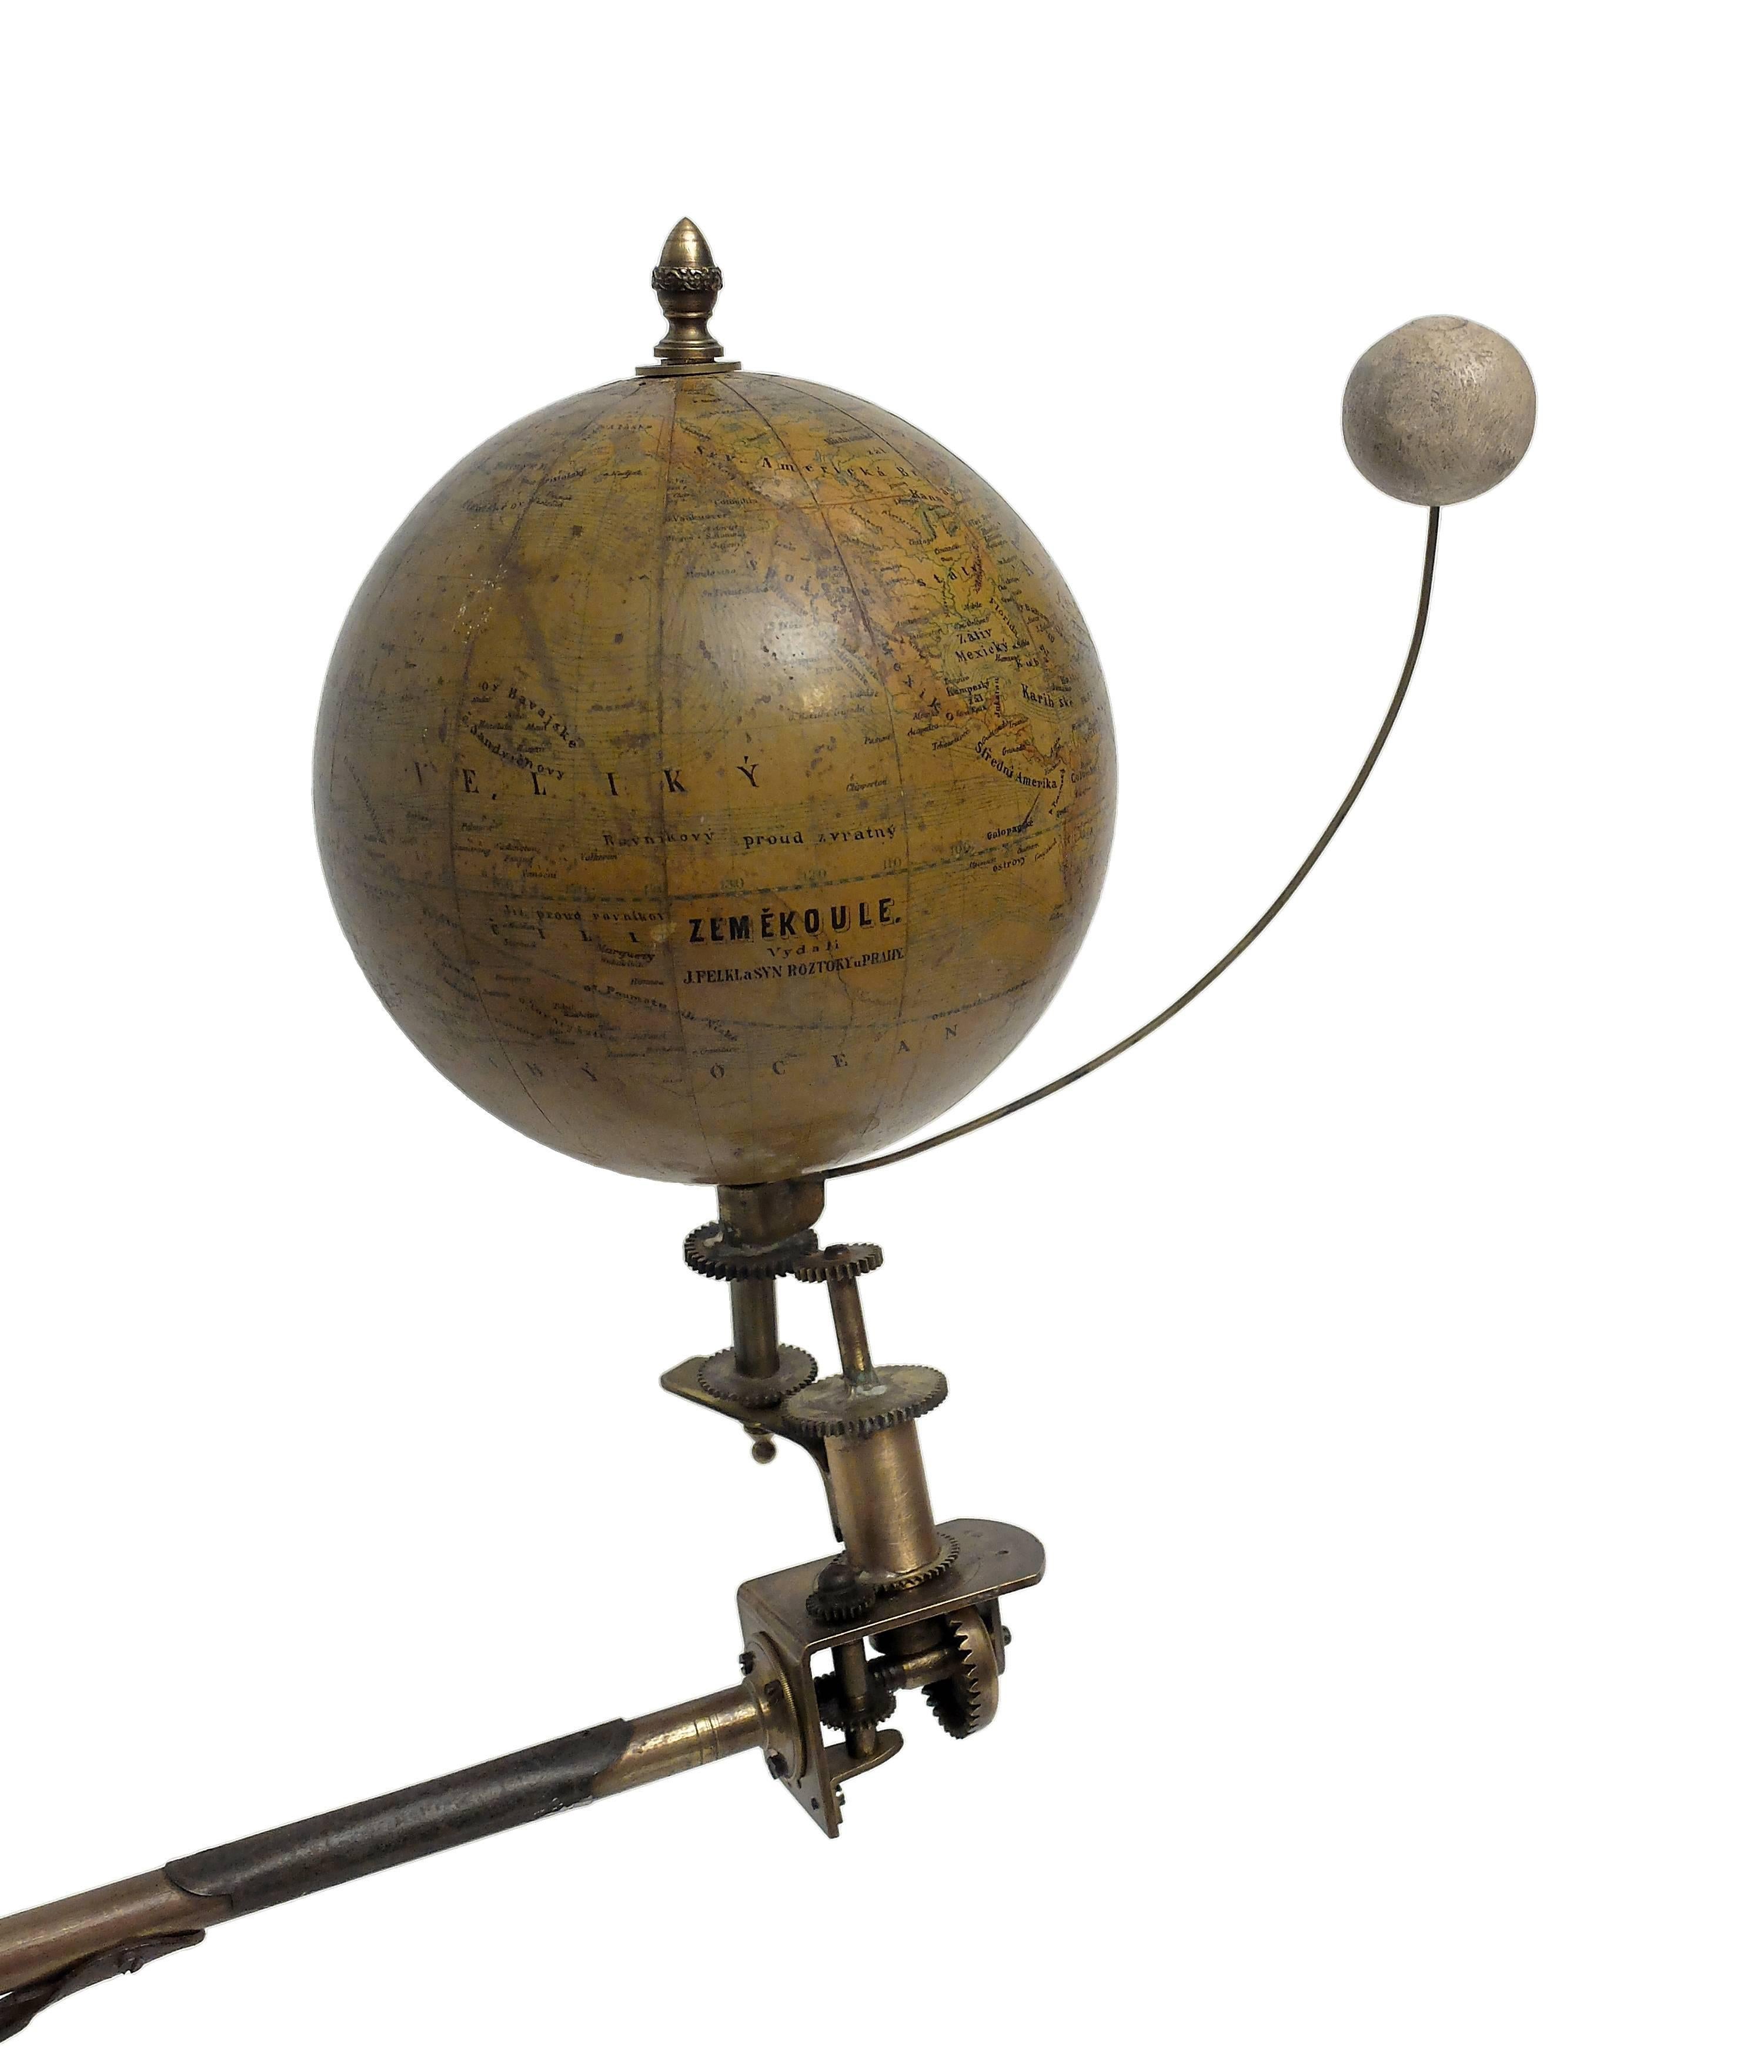 Scientific physical demonstration model signed on the earth globe: 